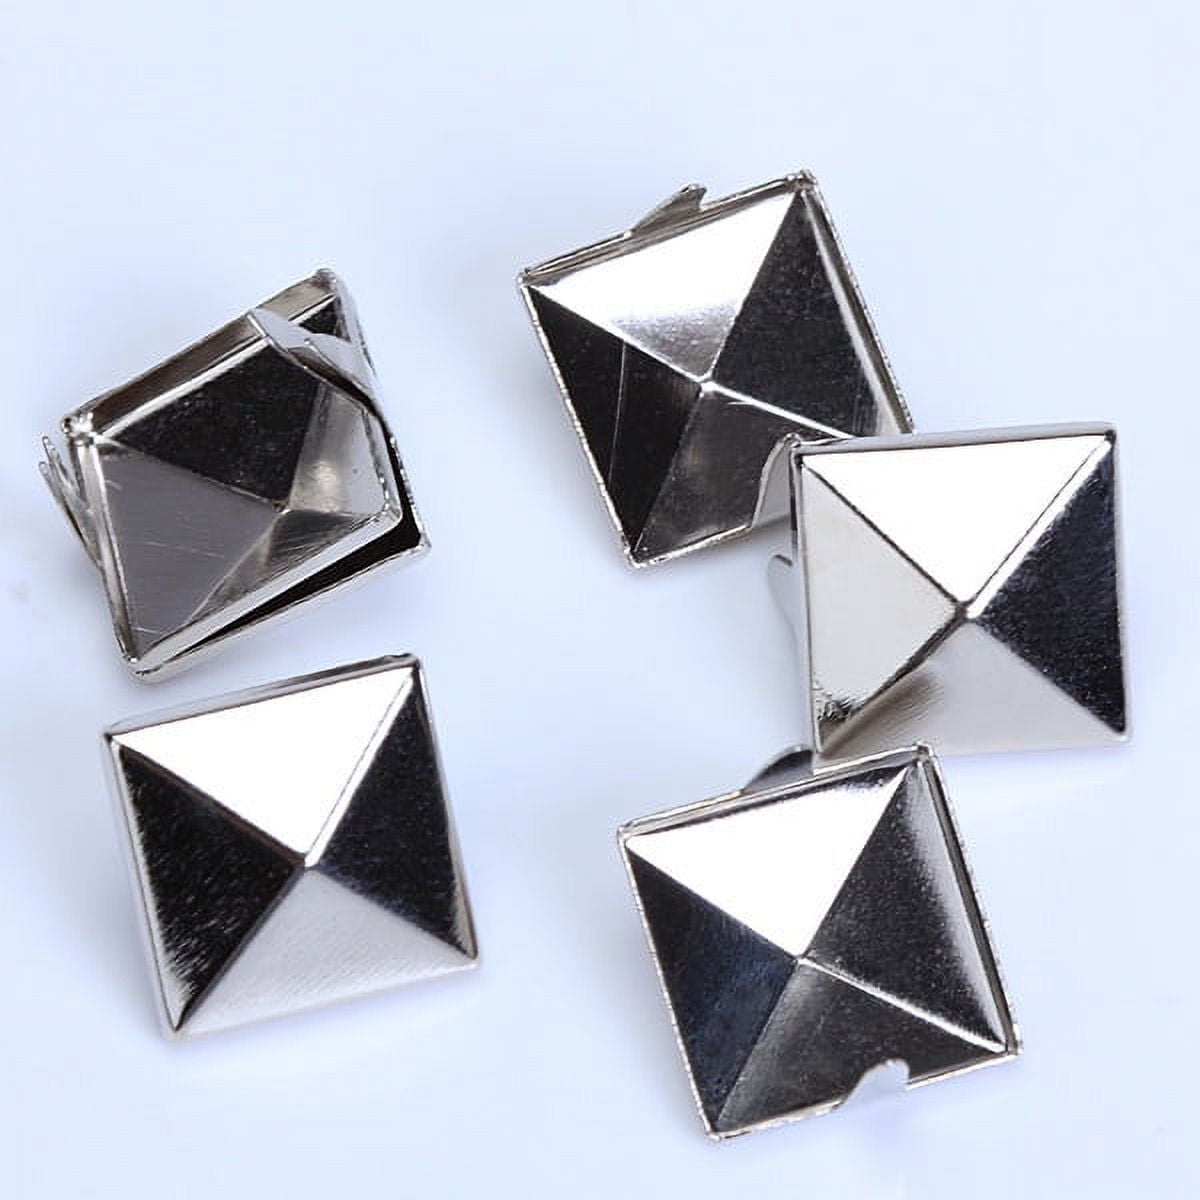 Liying Shop Pyramid Studs, 100 Pcs Nailheads Metal Punk Spikes Spots Square Rivets with Spikes (0.3 inch, Silver)